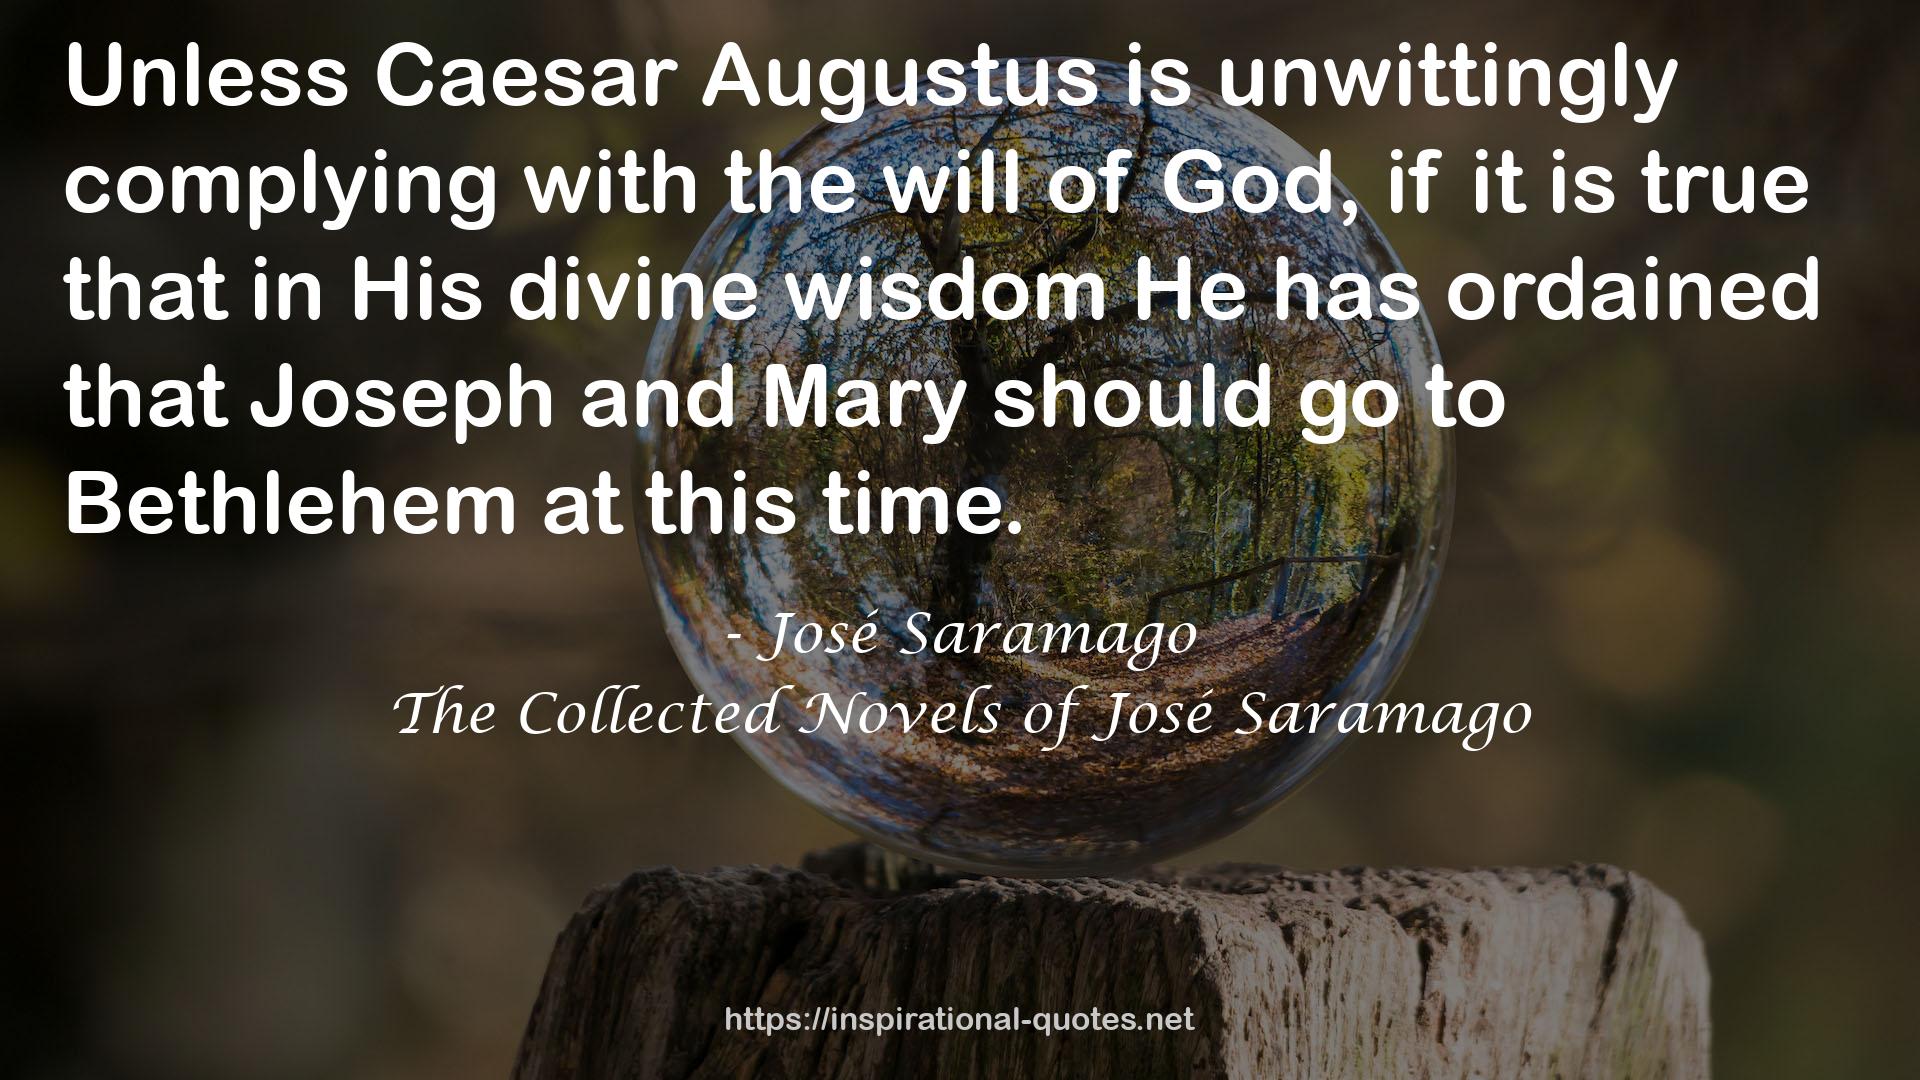 The Collected Novels of José Saramago QUOTES